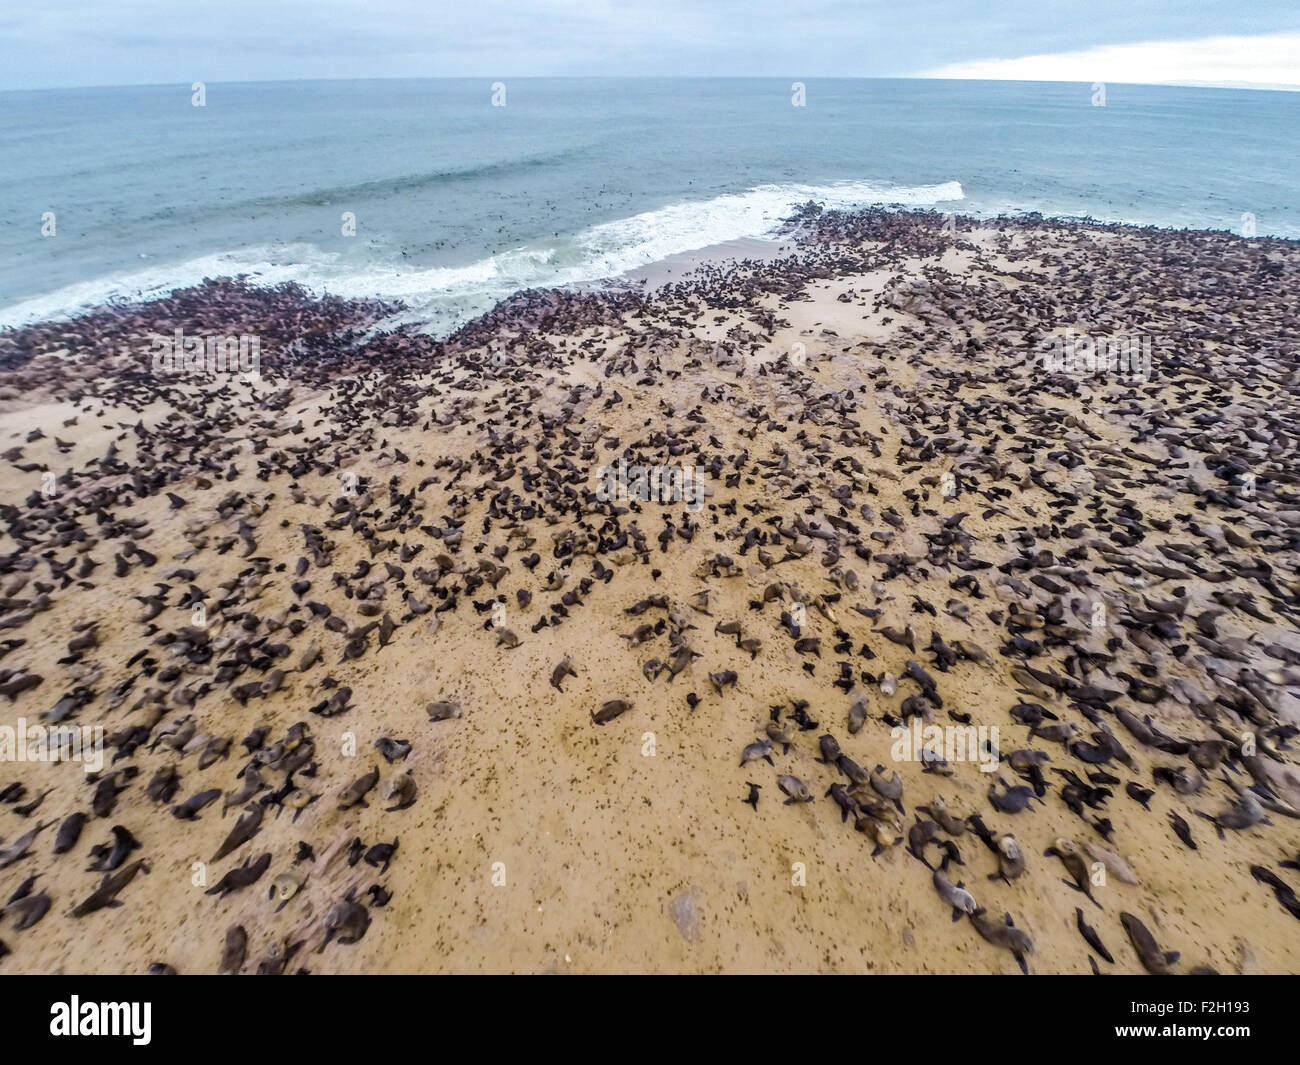 Cape Fur Seals at Seal reserve along coast in Namibia, Africa Stock Photo